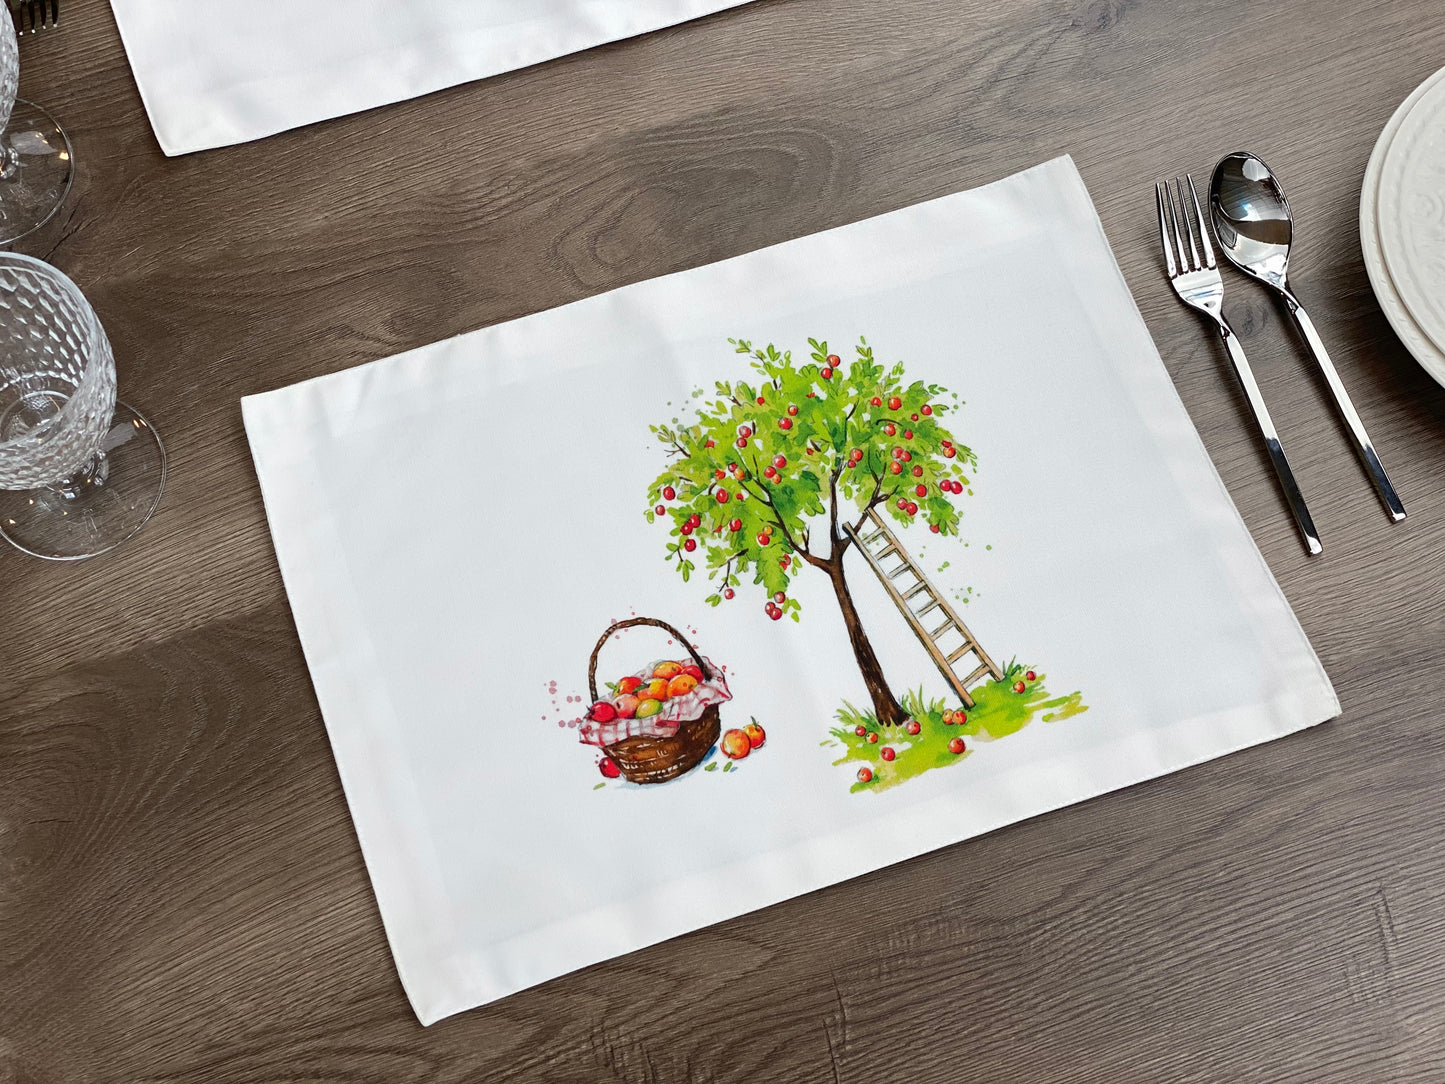 Set of 4 Harvest time Apple farm Placemat, basket of ripe apples and apple tree with ladder, Washable Cotton Placemat for fall dining table